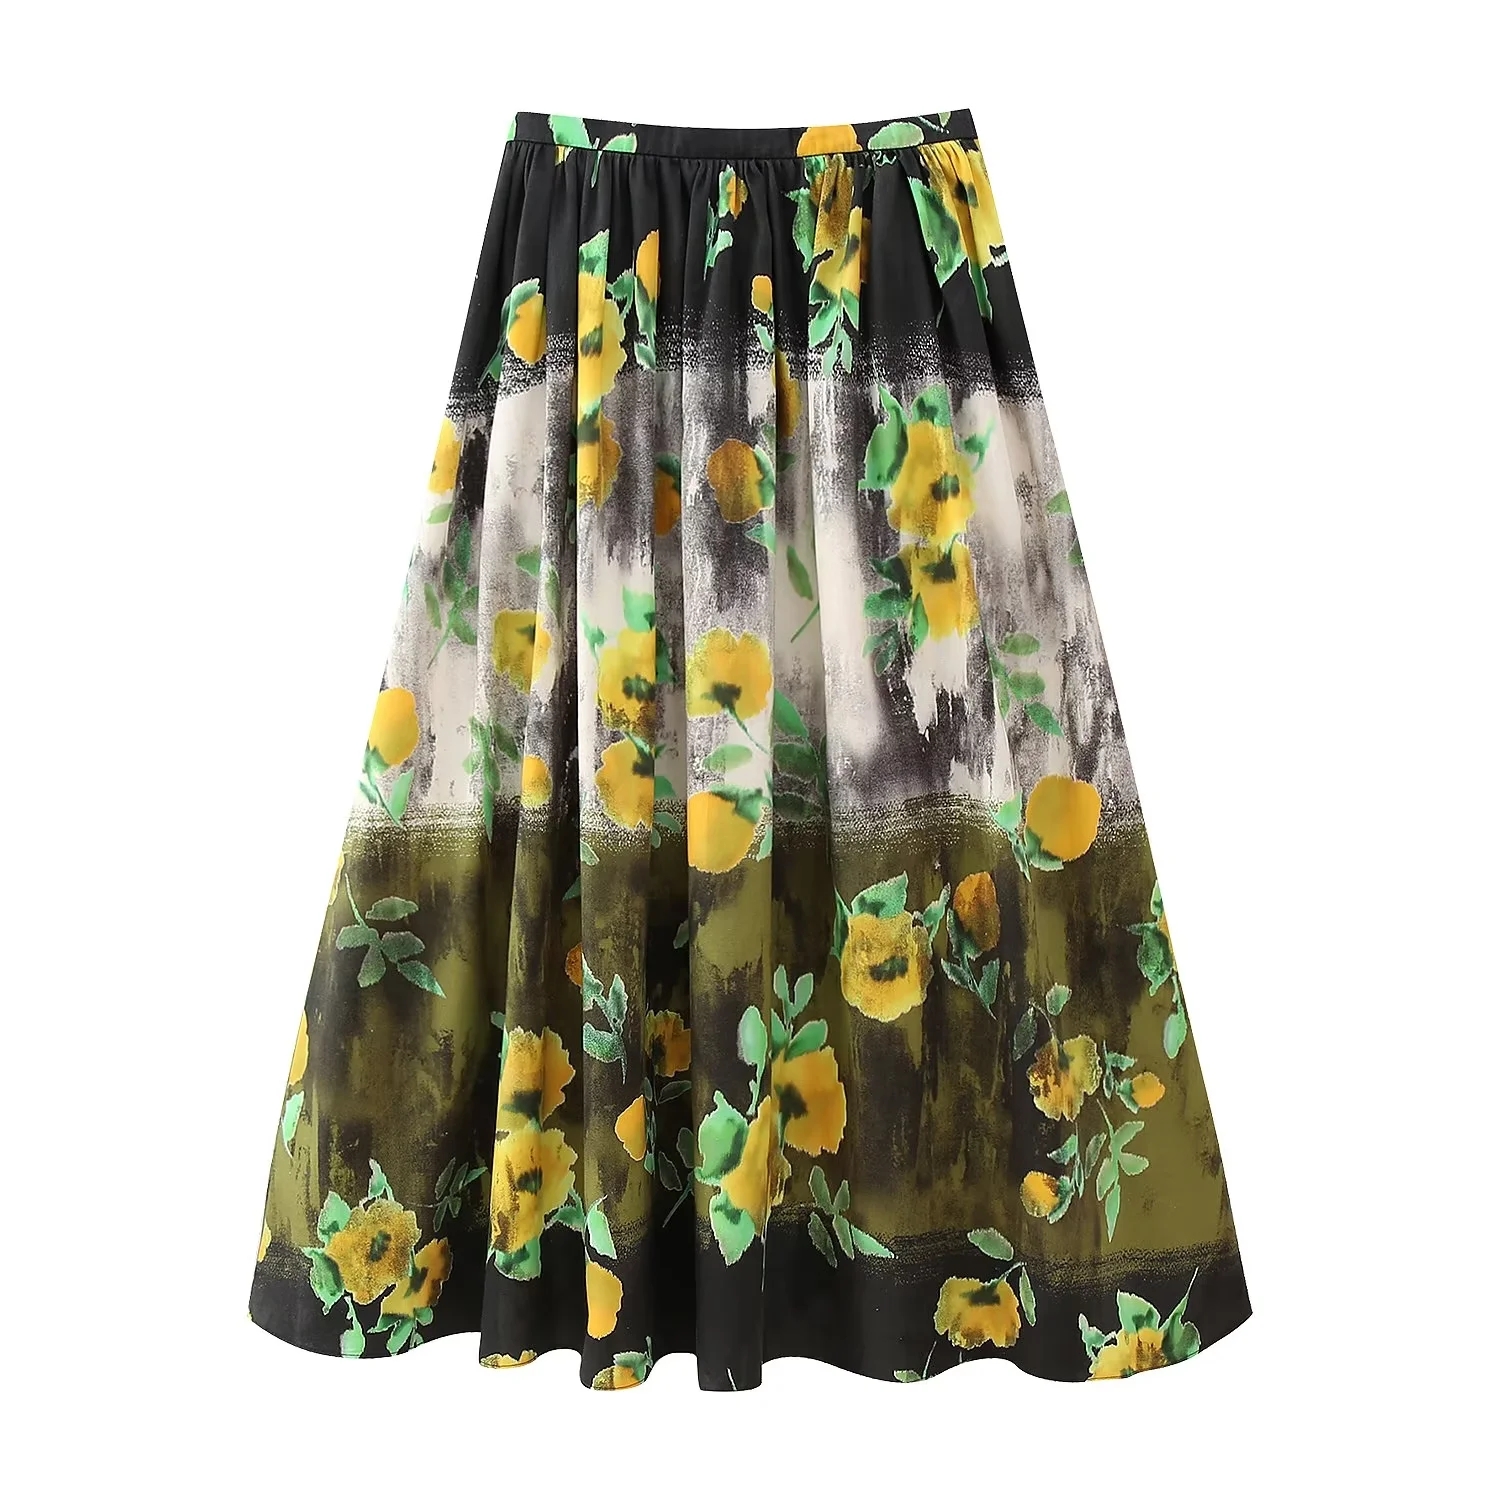 Fashion Color Polyester Printed Pleated Skirt,Skirts